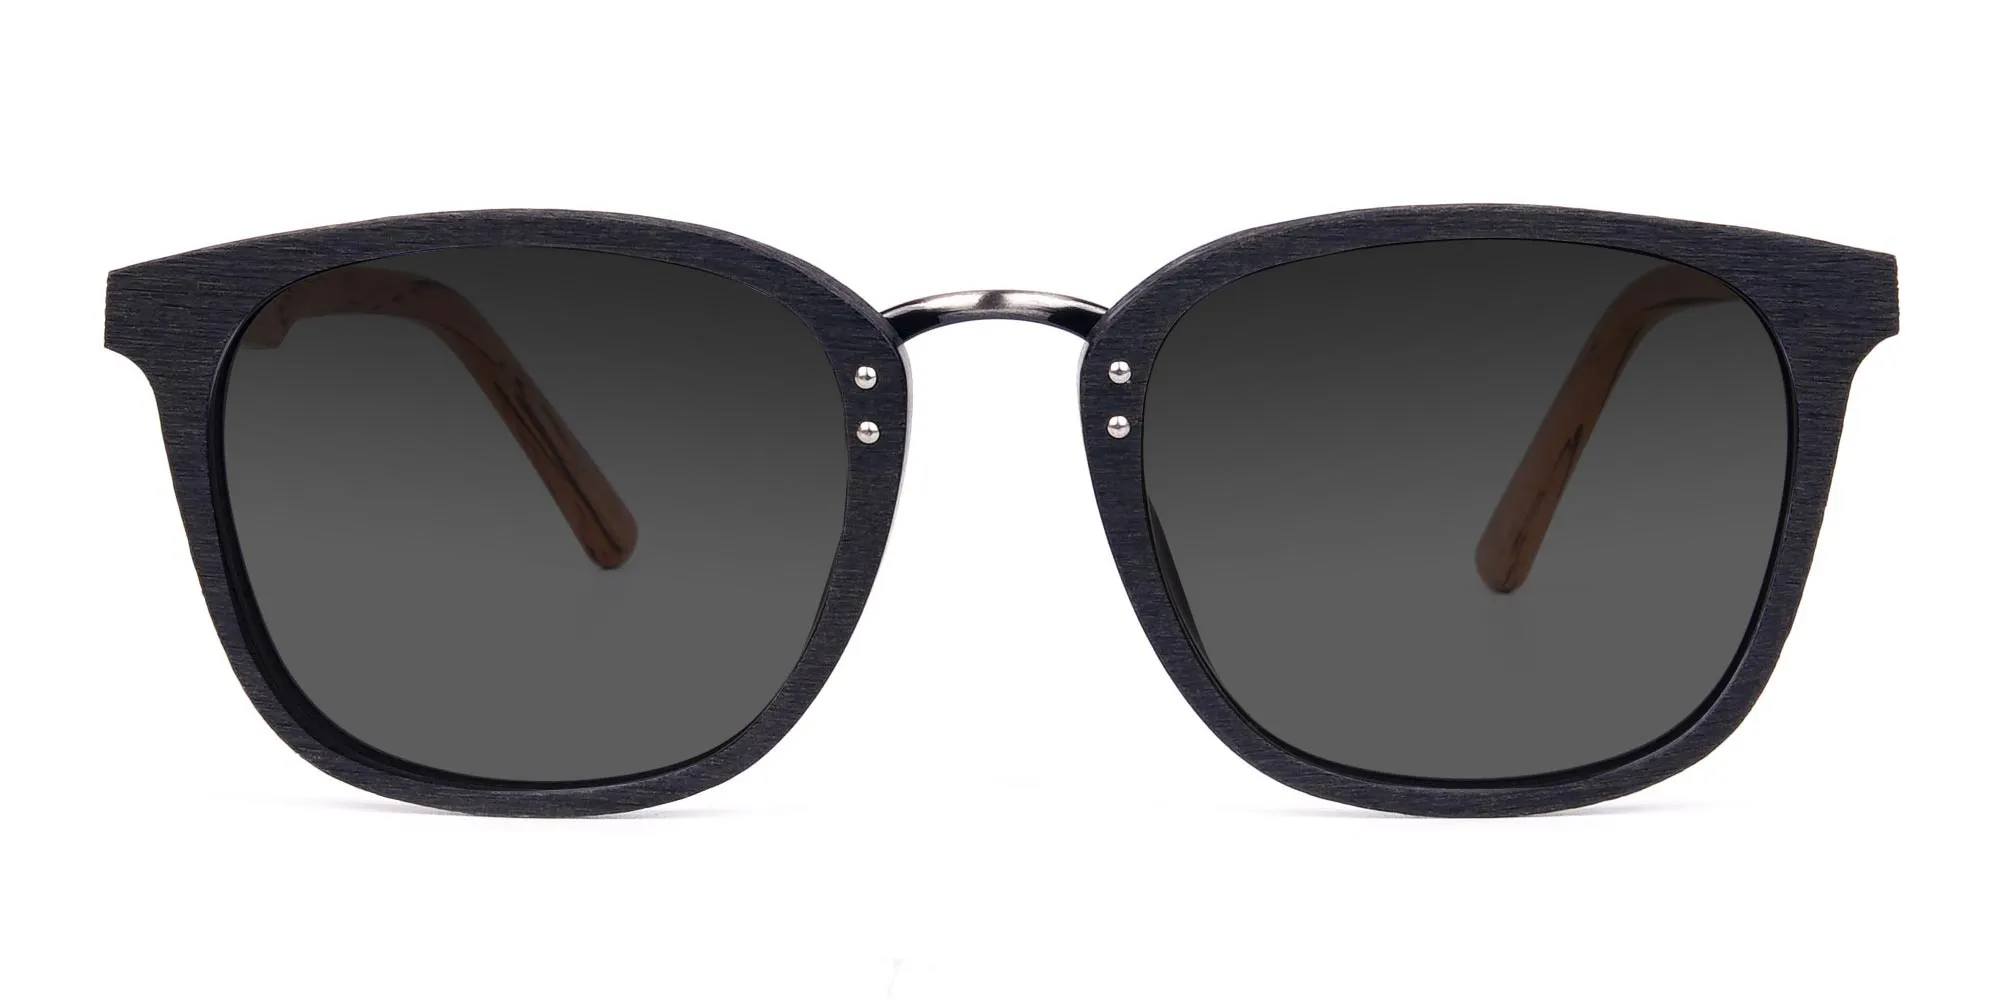 Wood-Black-Frame-Square-Sunglasses-with-Grey-Tint-2